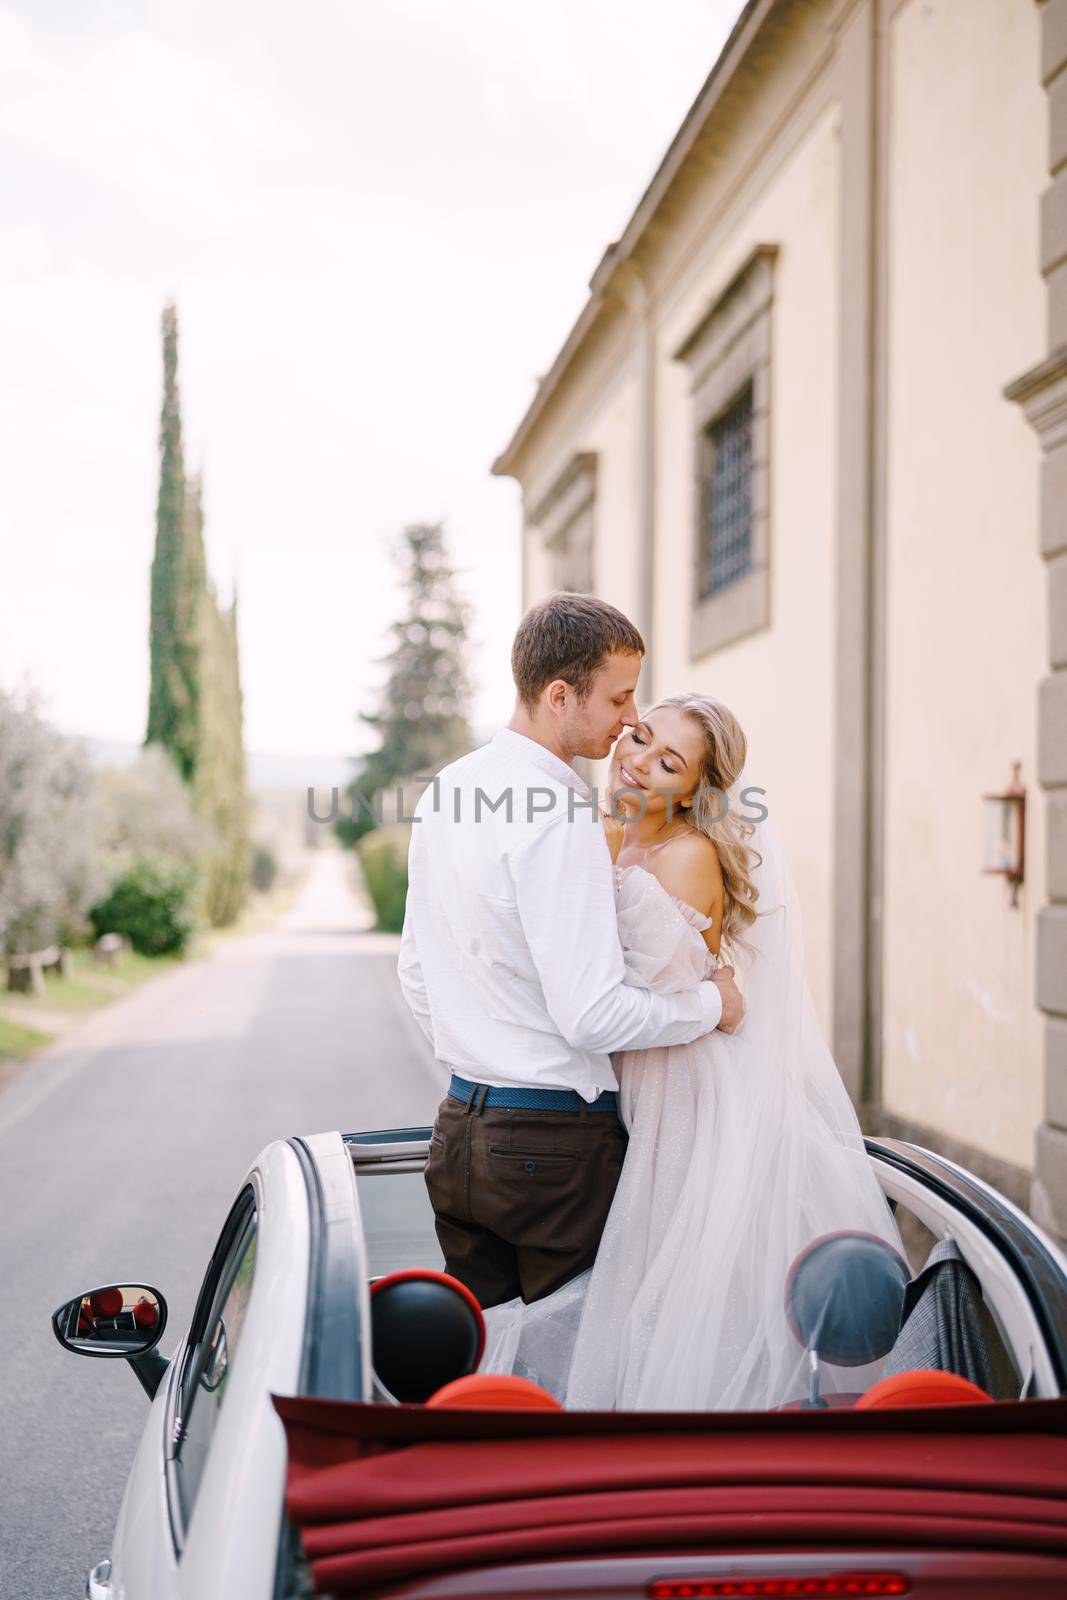 Wedding in Florence, Italy, in an old villa-winery. The bride and groom kiss in an open convertible.